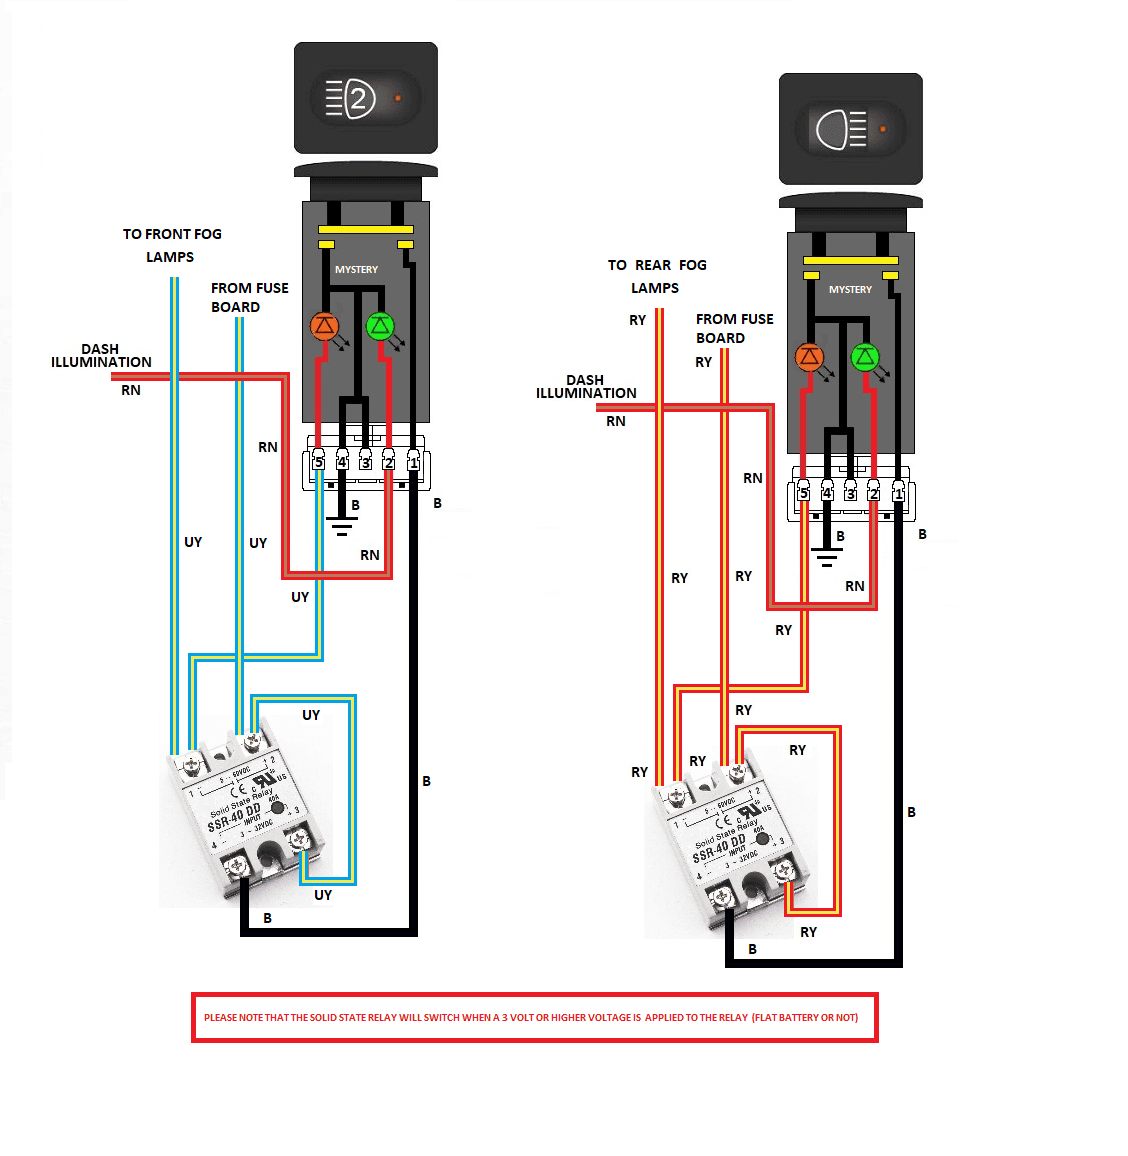 FRONT REAR FOG SWITCH.png